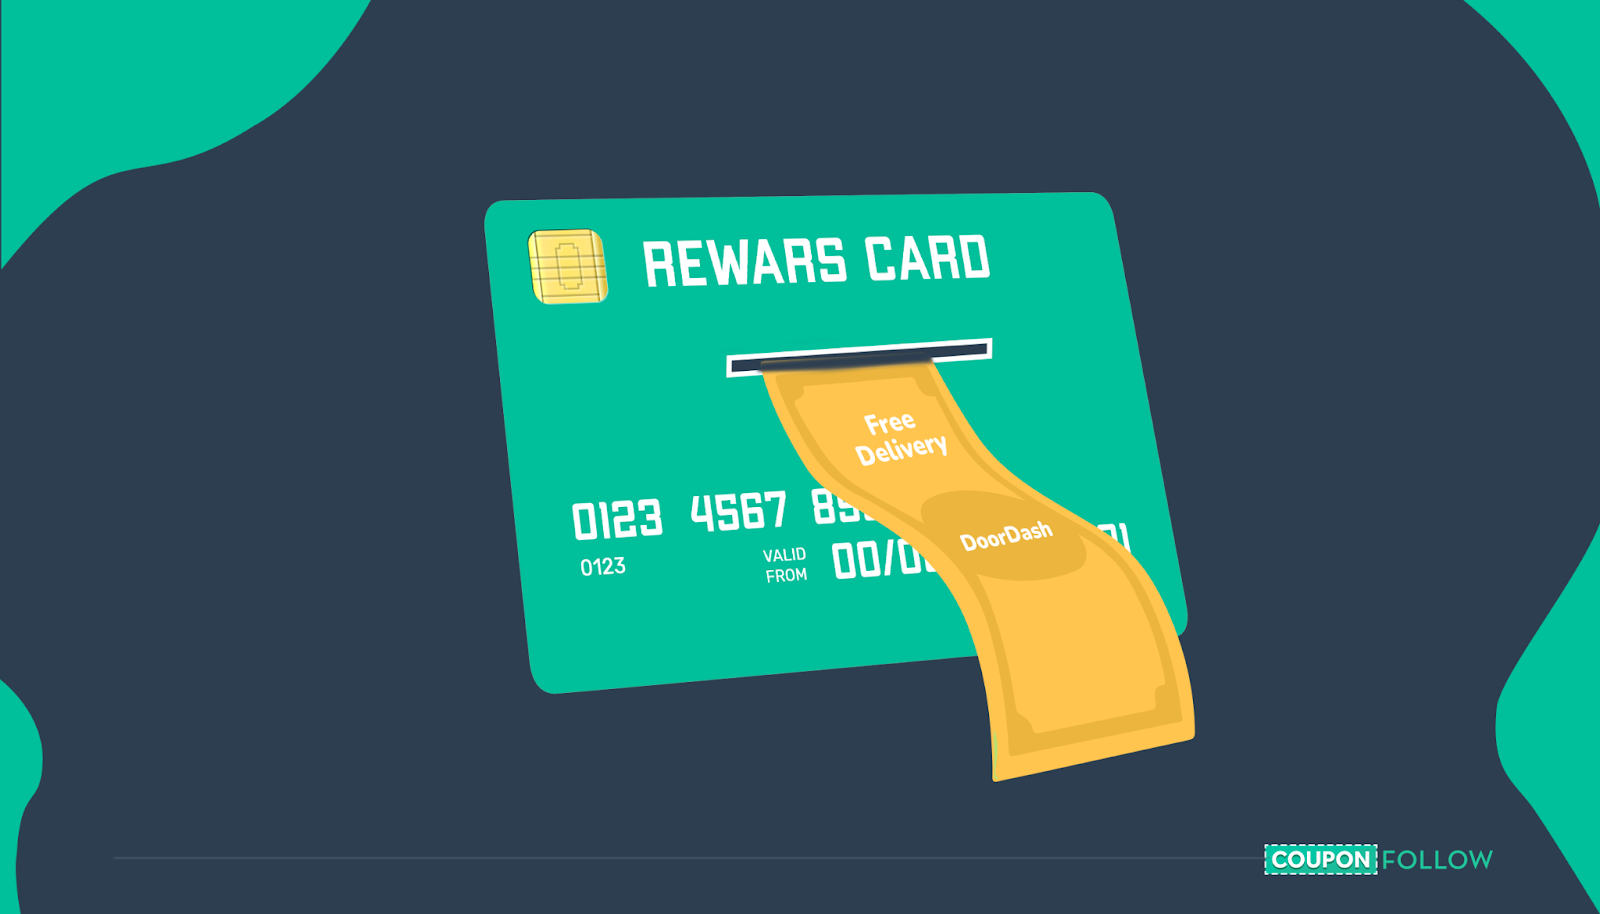 Illustration of a generic rewards card that can be used to obtain free delivery